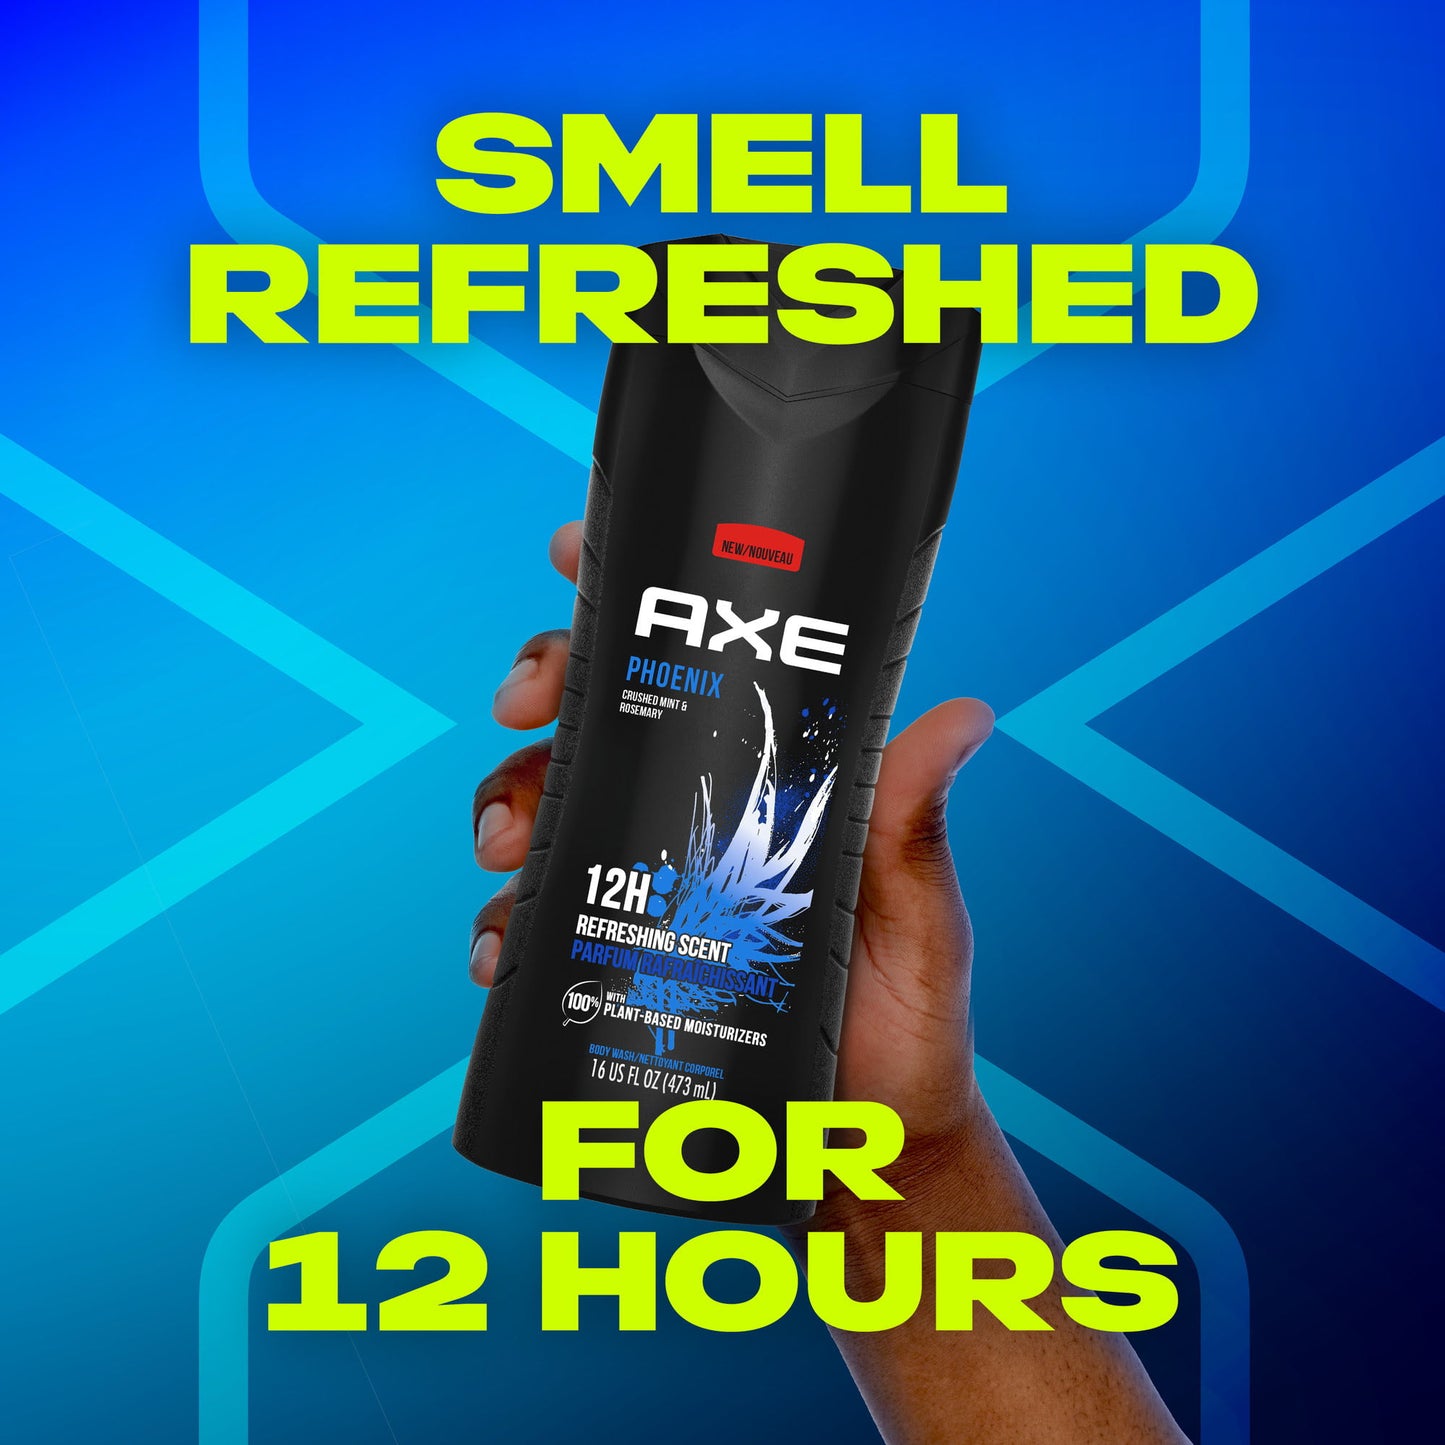 Axe Phoenix Refreshing Long Lasting Body Wash Twin Pack, Crushed Mint and Rosemary, 16 fl oz